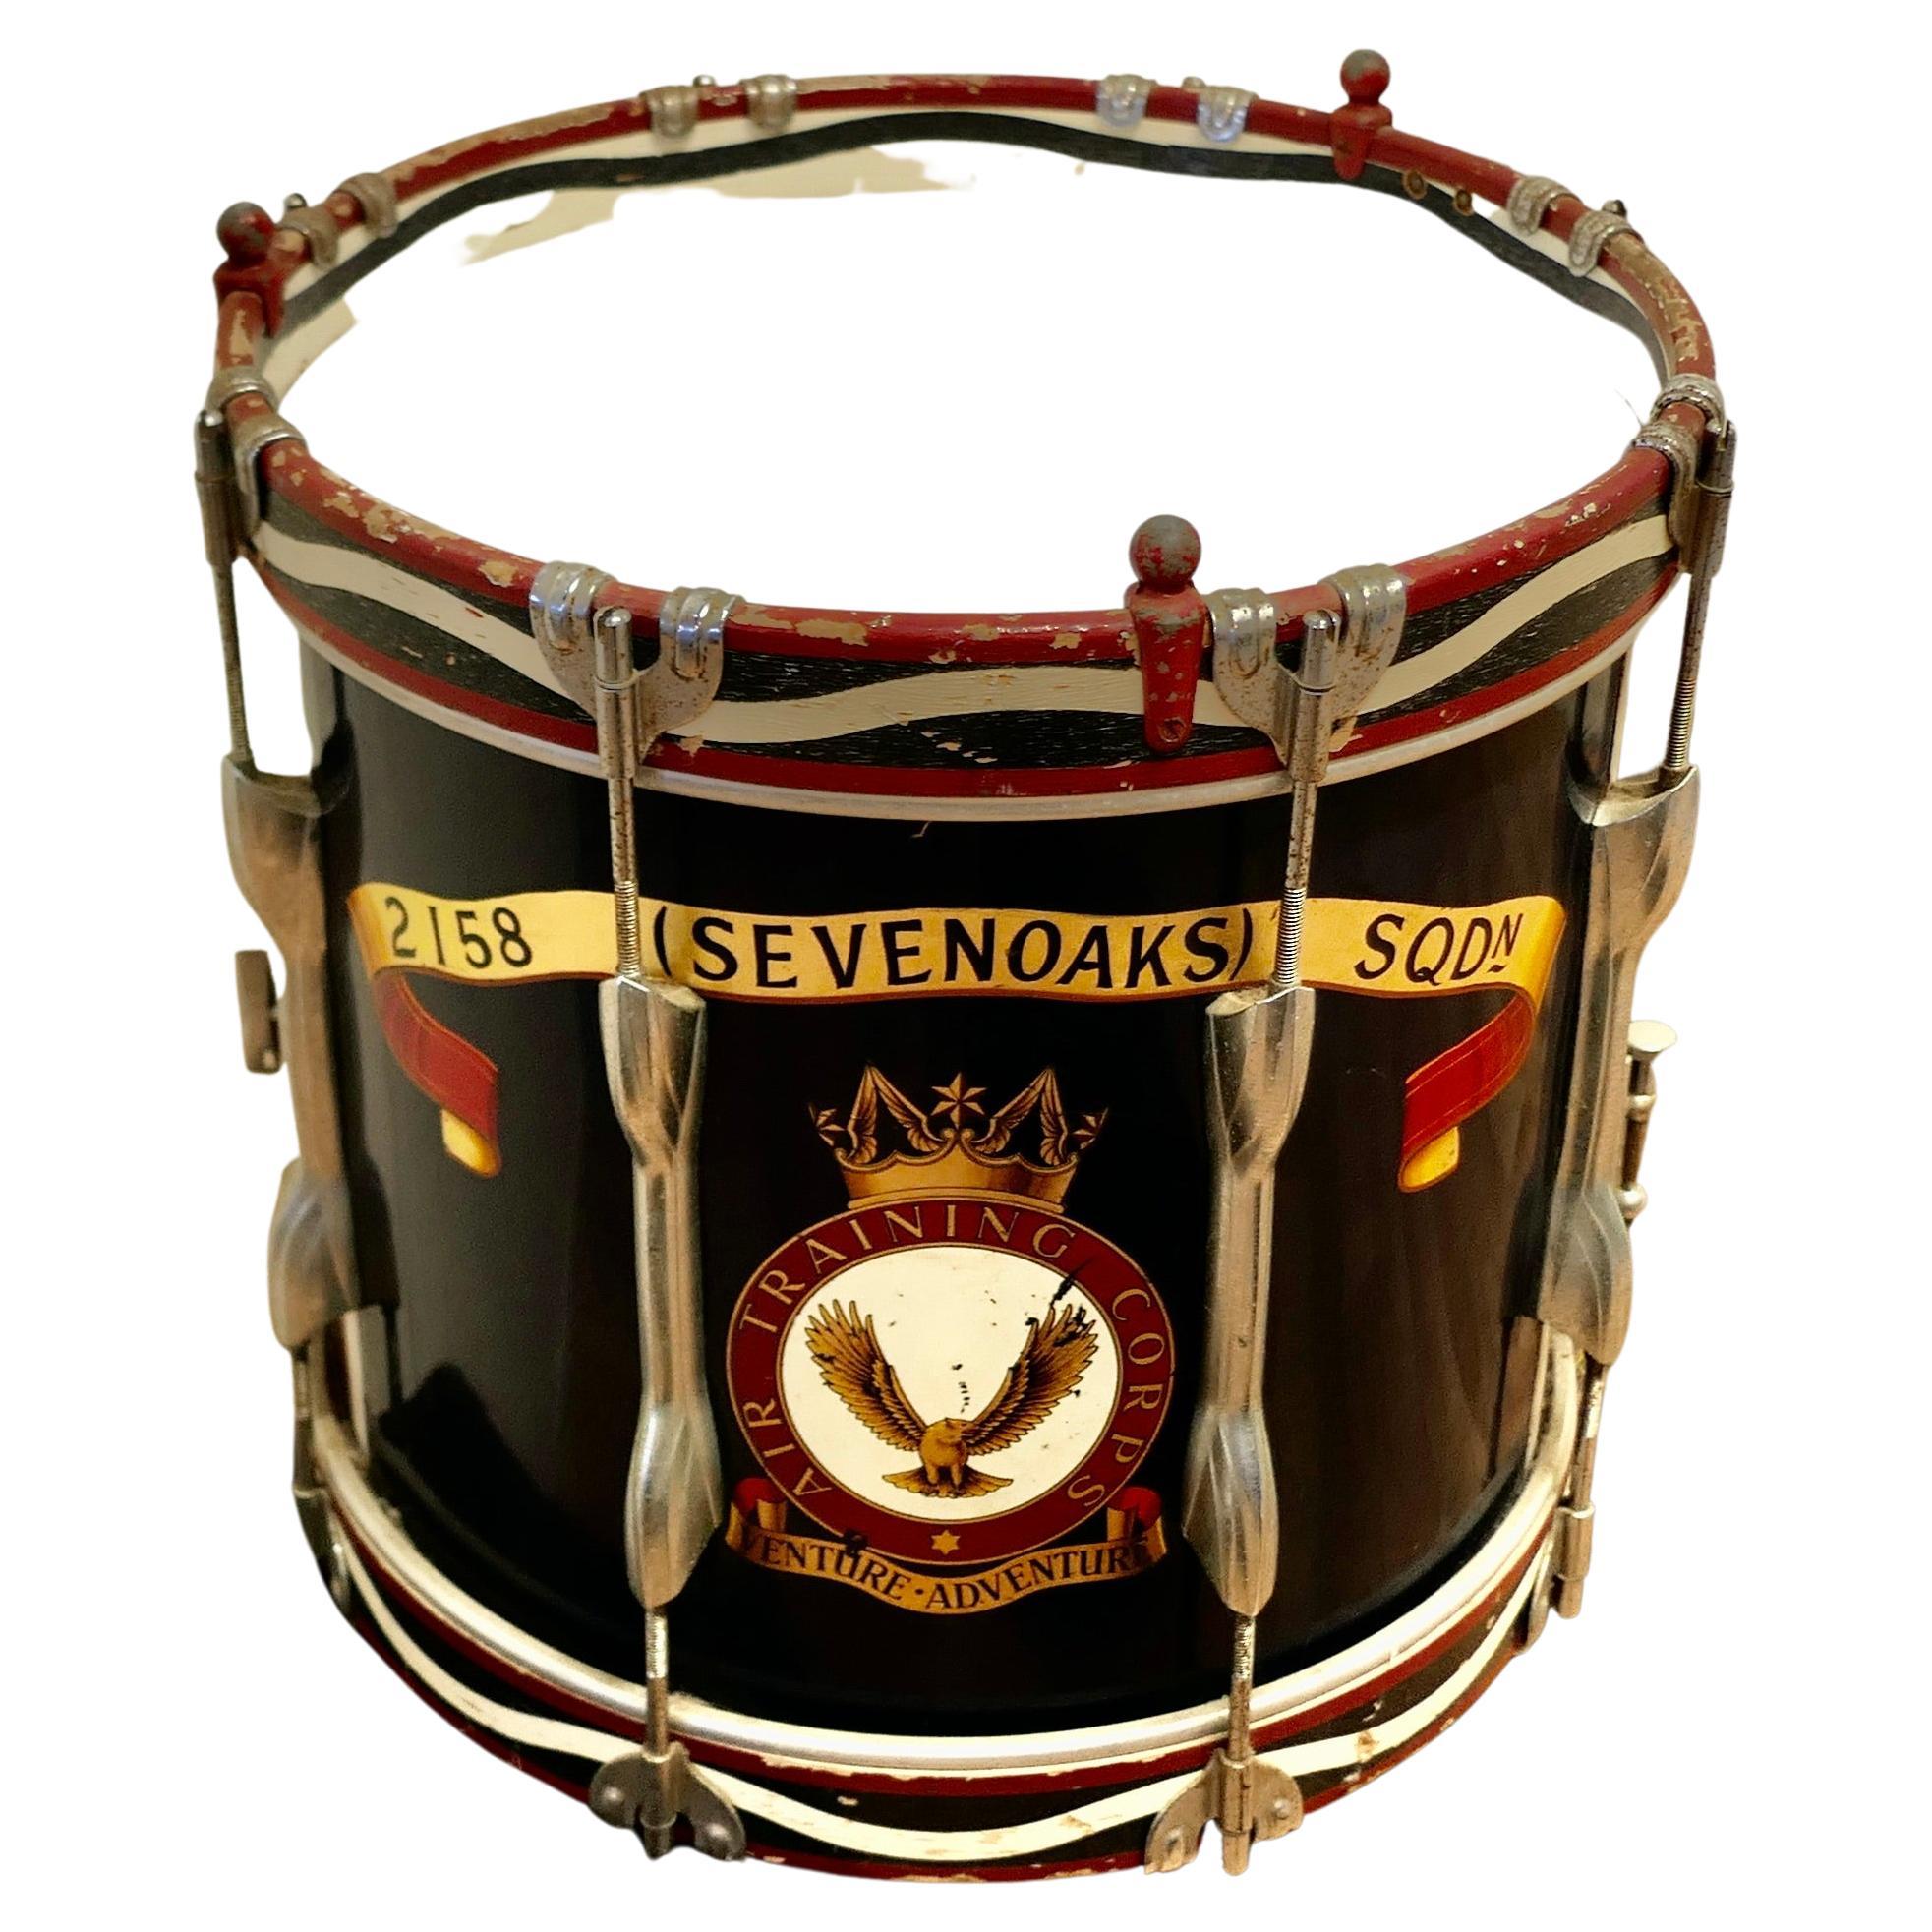 Handsome Military Snare Drum from Sevenoaks Air Training Corps For Sale